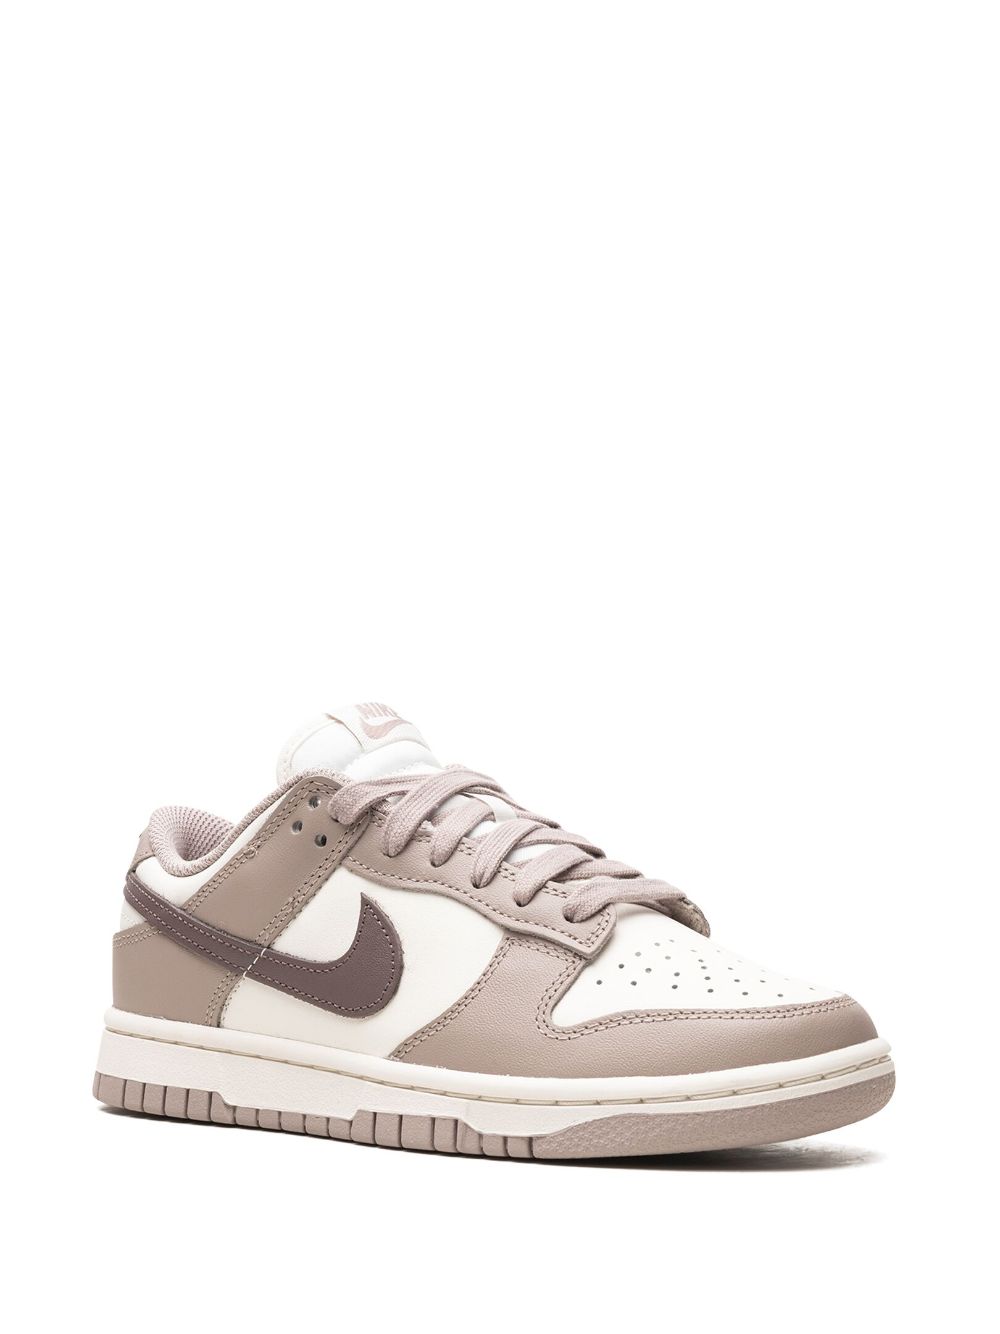 Nike Dunk Diffused Taupe